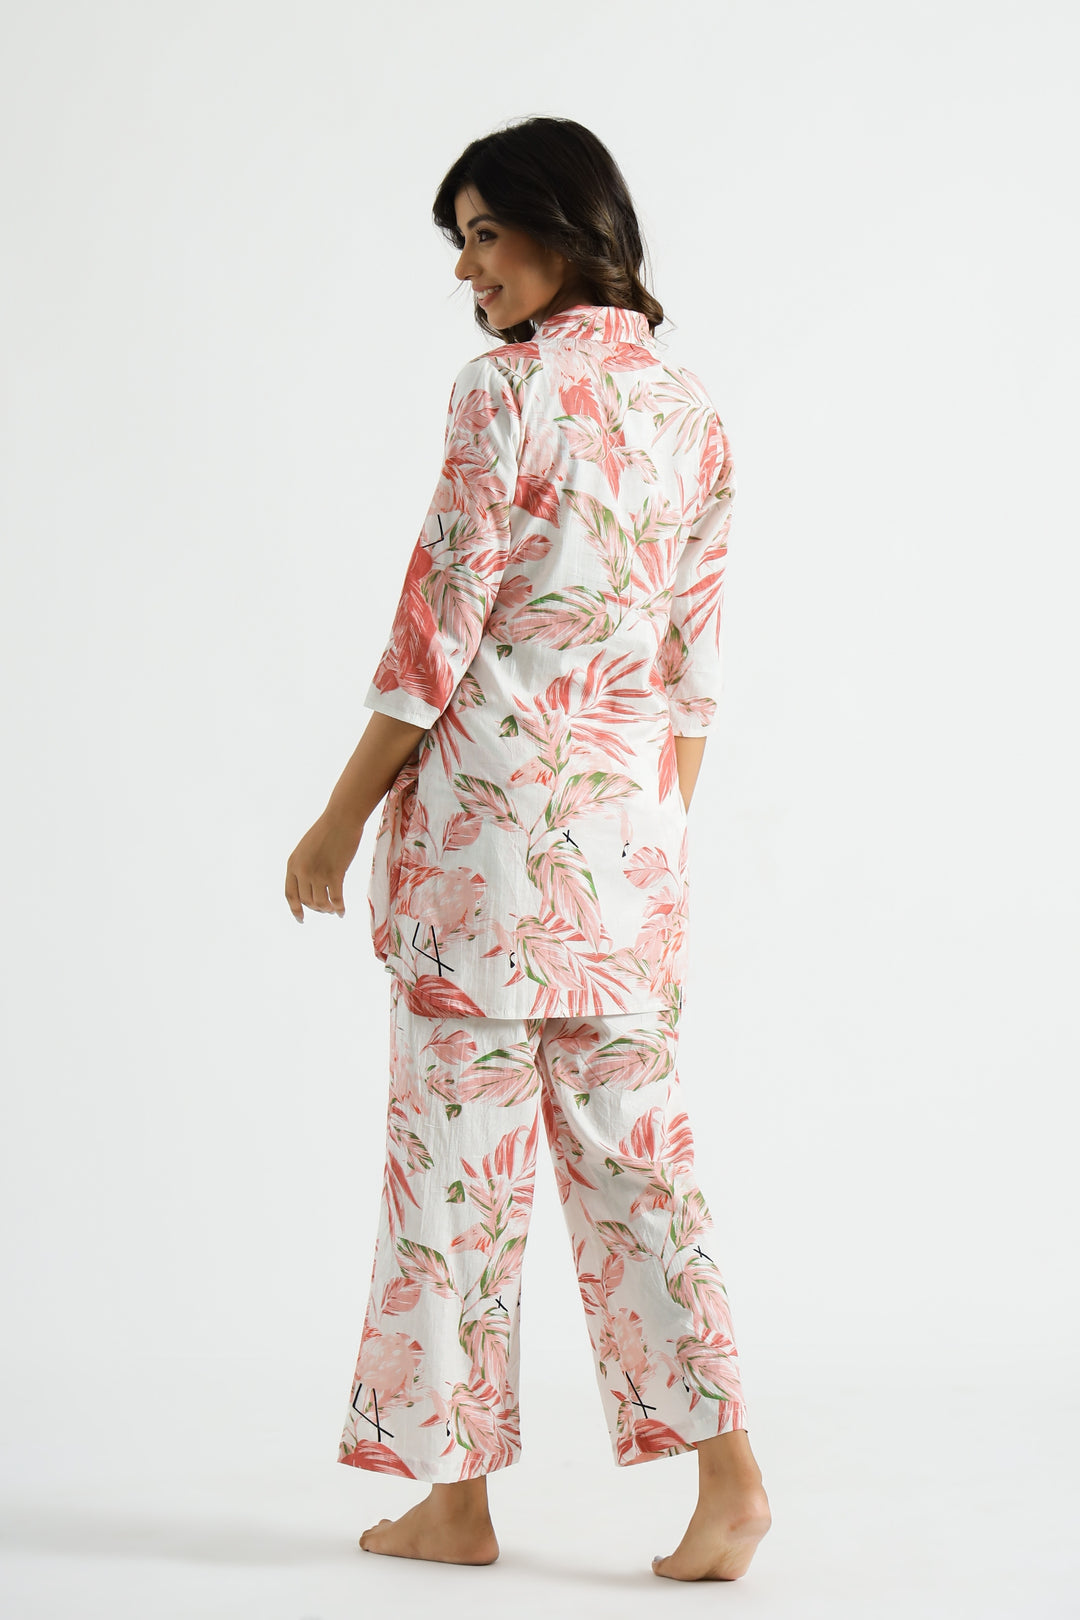 Pink Flamingo Collared Cotton Lounge Co-Ord Set with 7 button